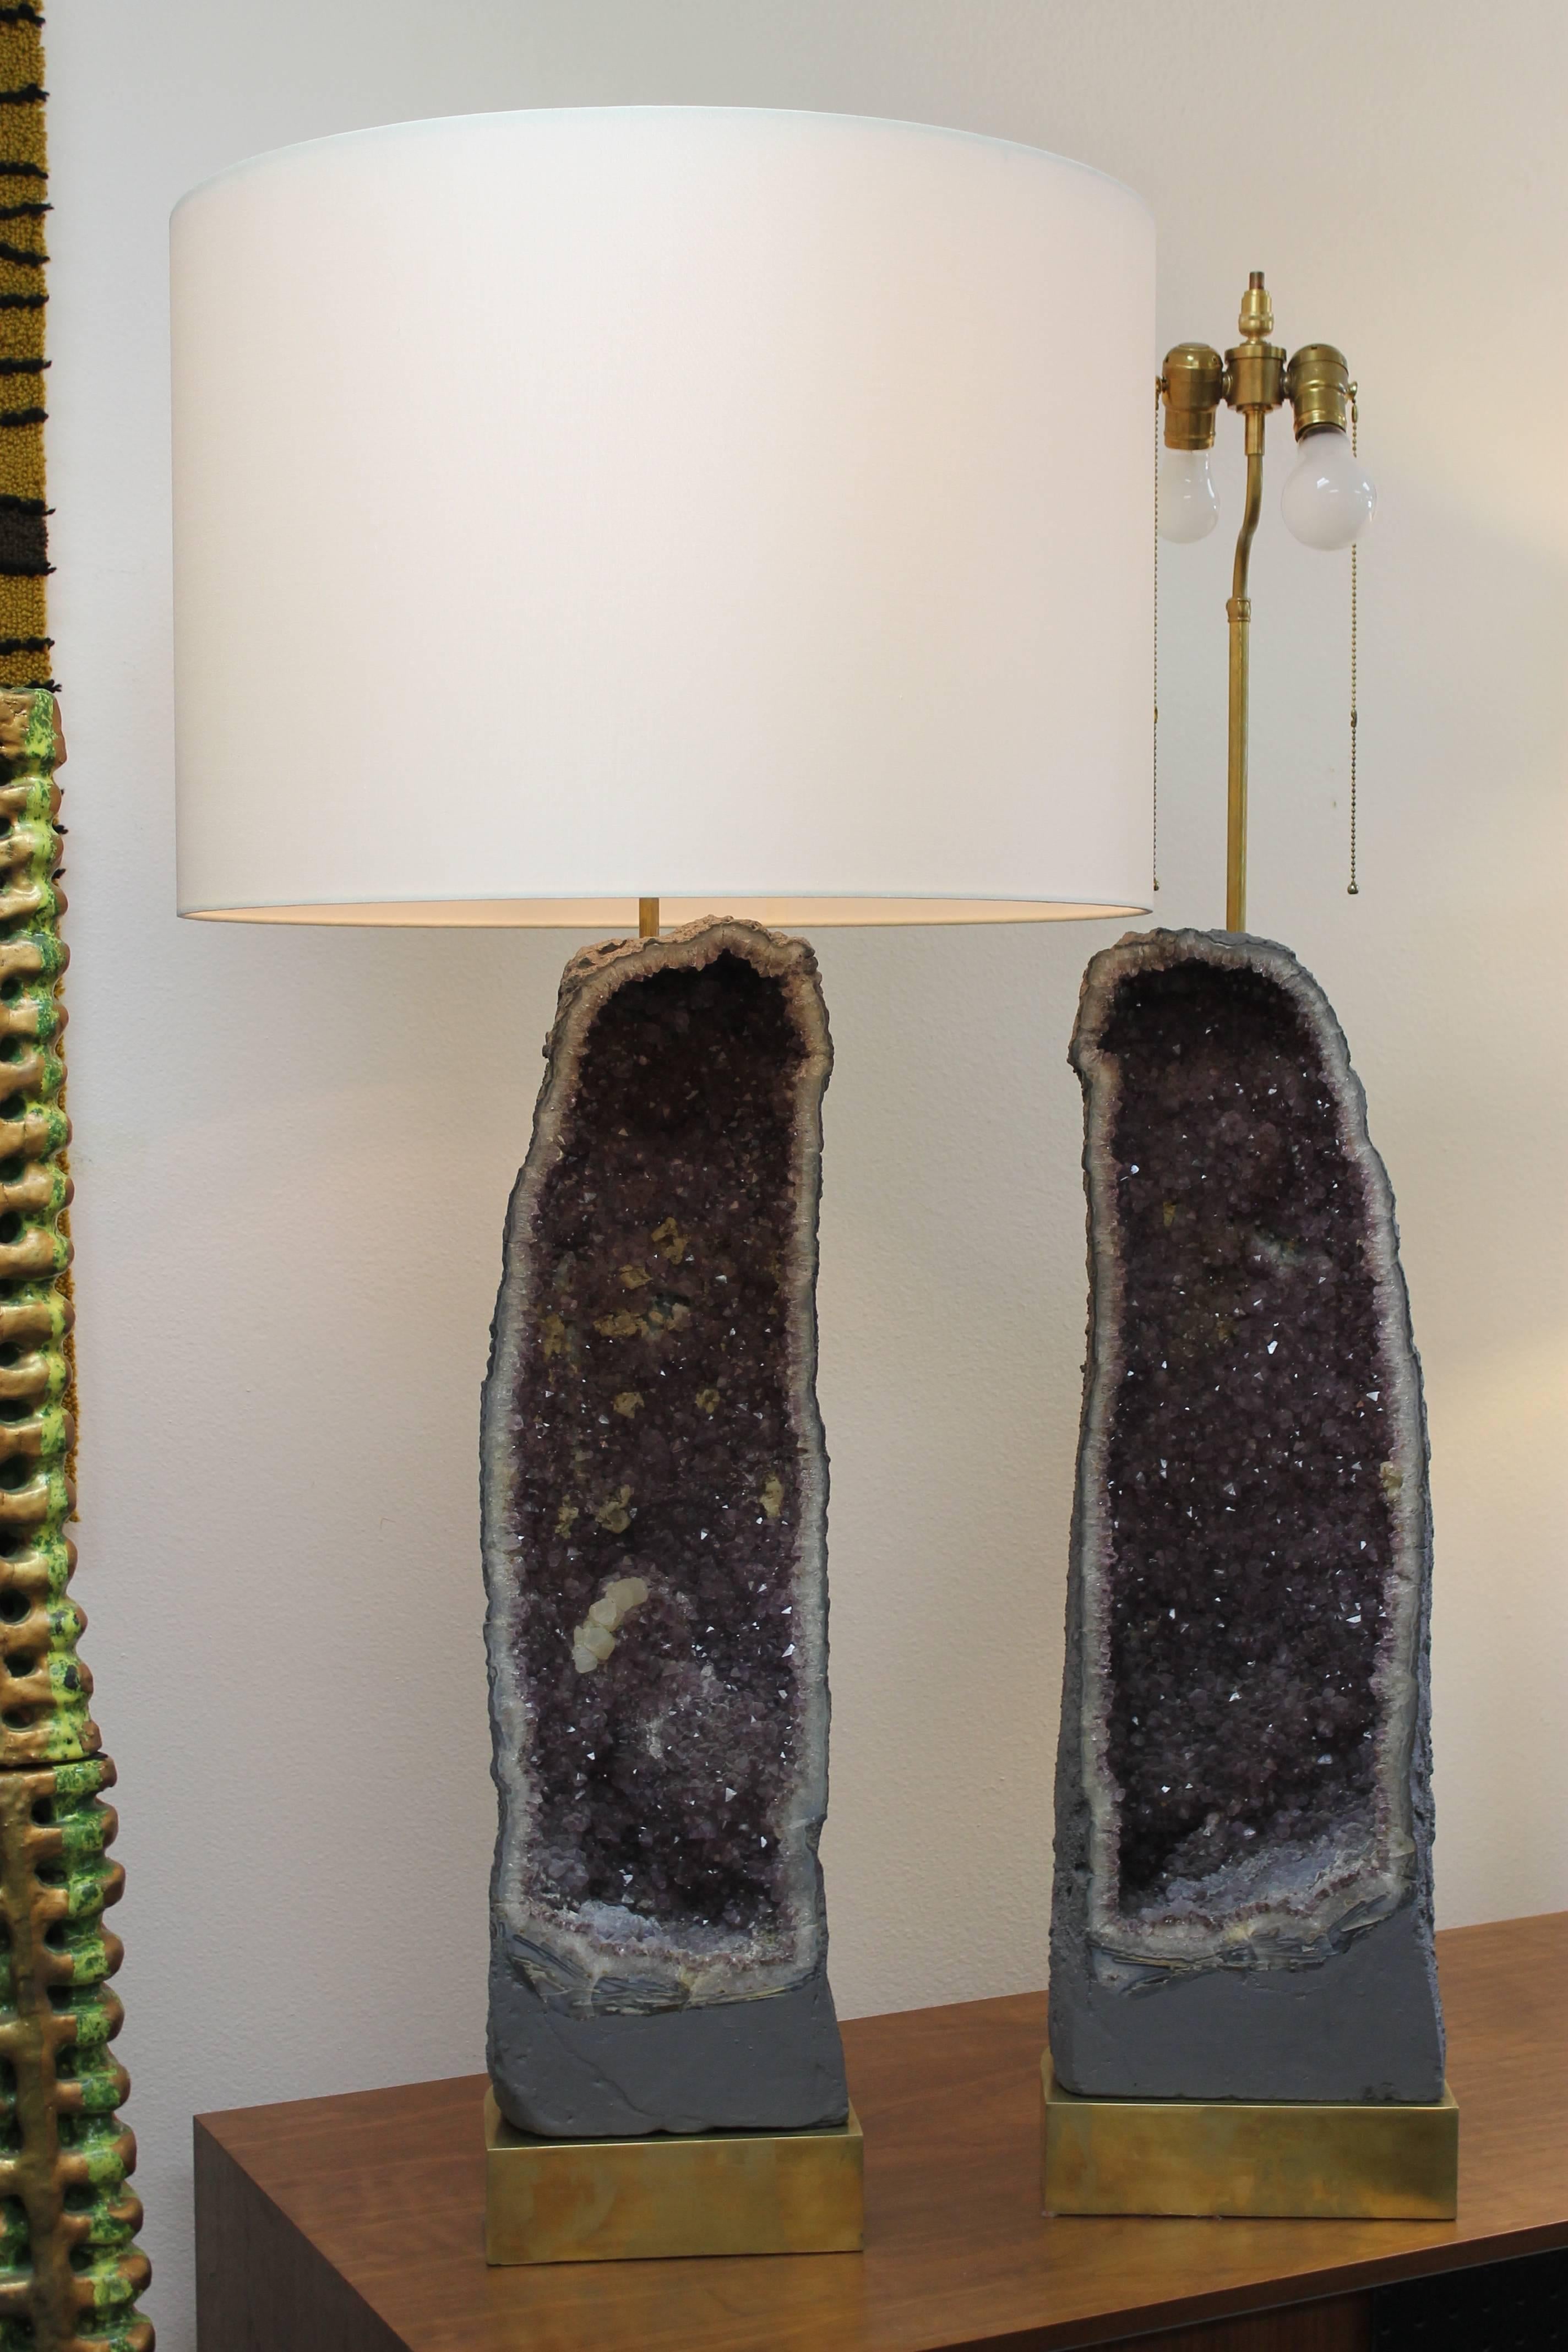 Monumental pair of custom amethyst geode lamps. They measure 48” total height from base to the top of shade. Geode is 9.5” wide and 28.5” high. Base is 10” wide, 8” deep and 2.75” high.  Lamp shades ARE included.